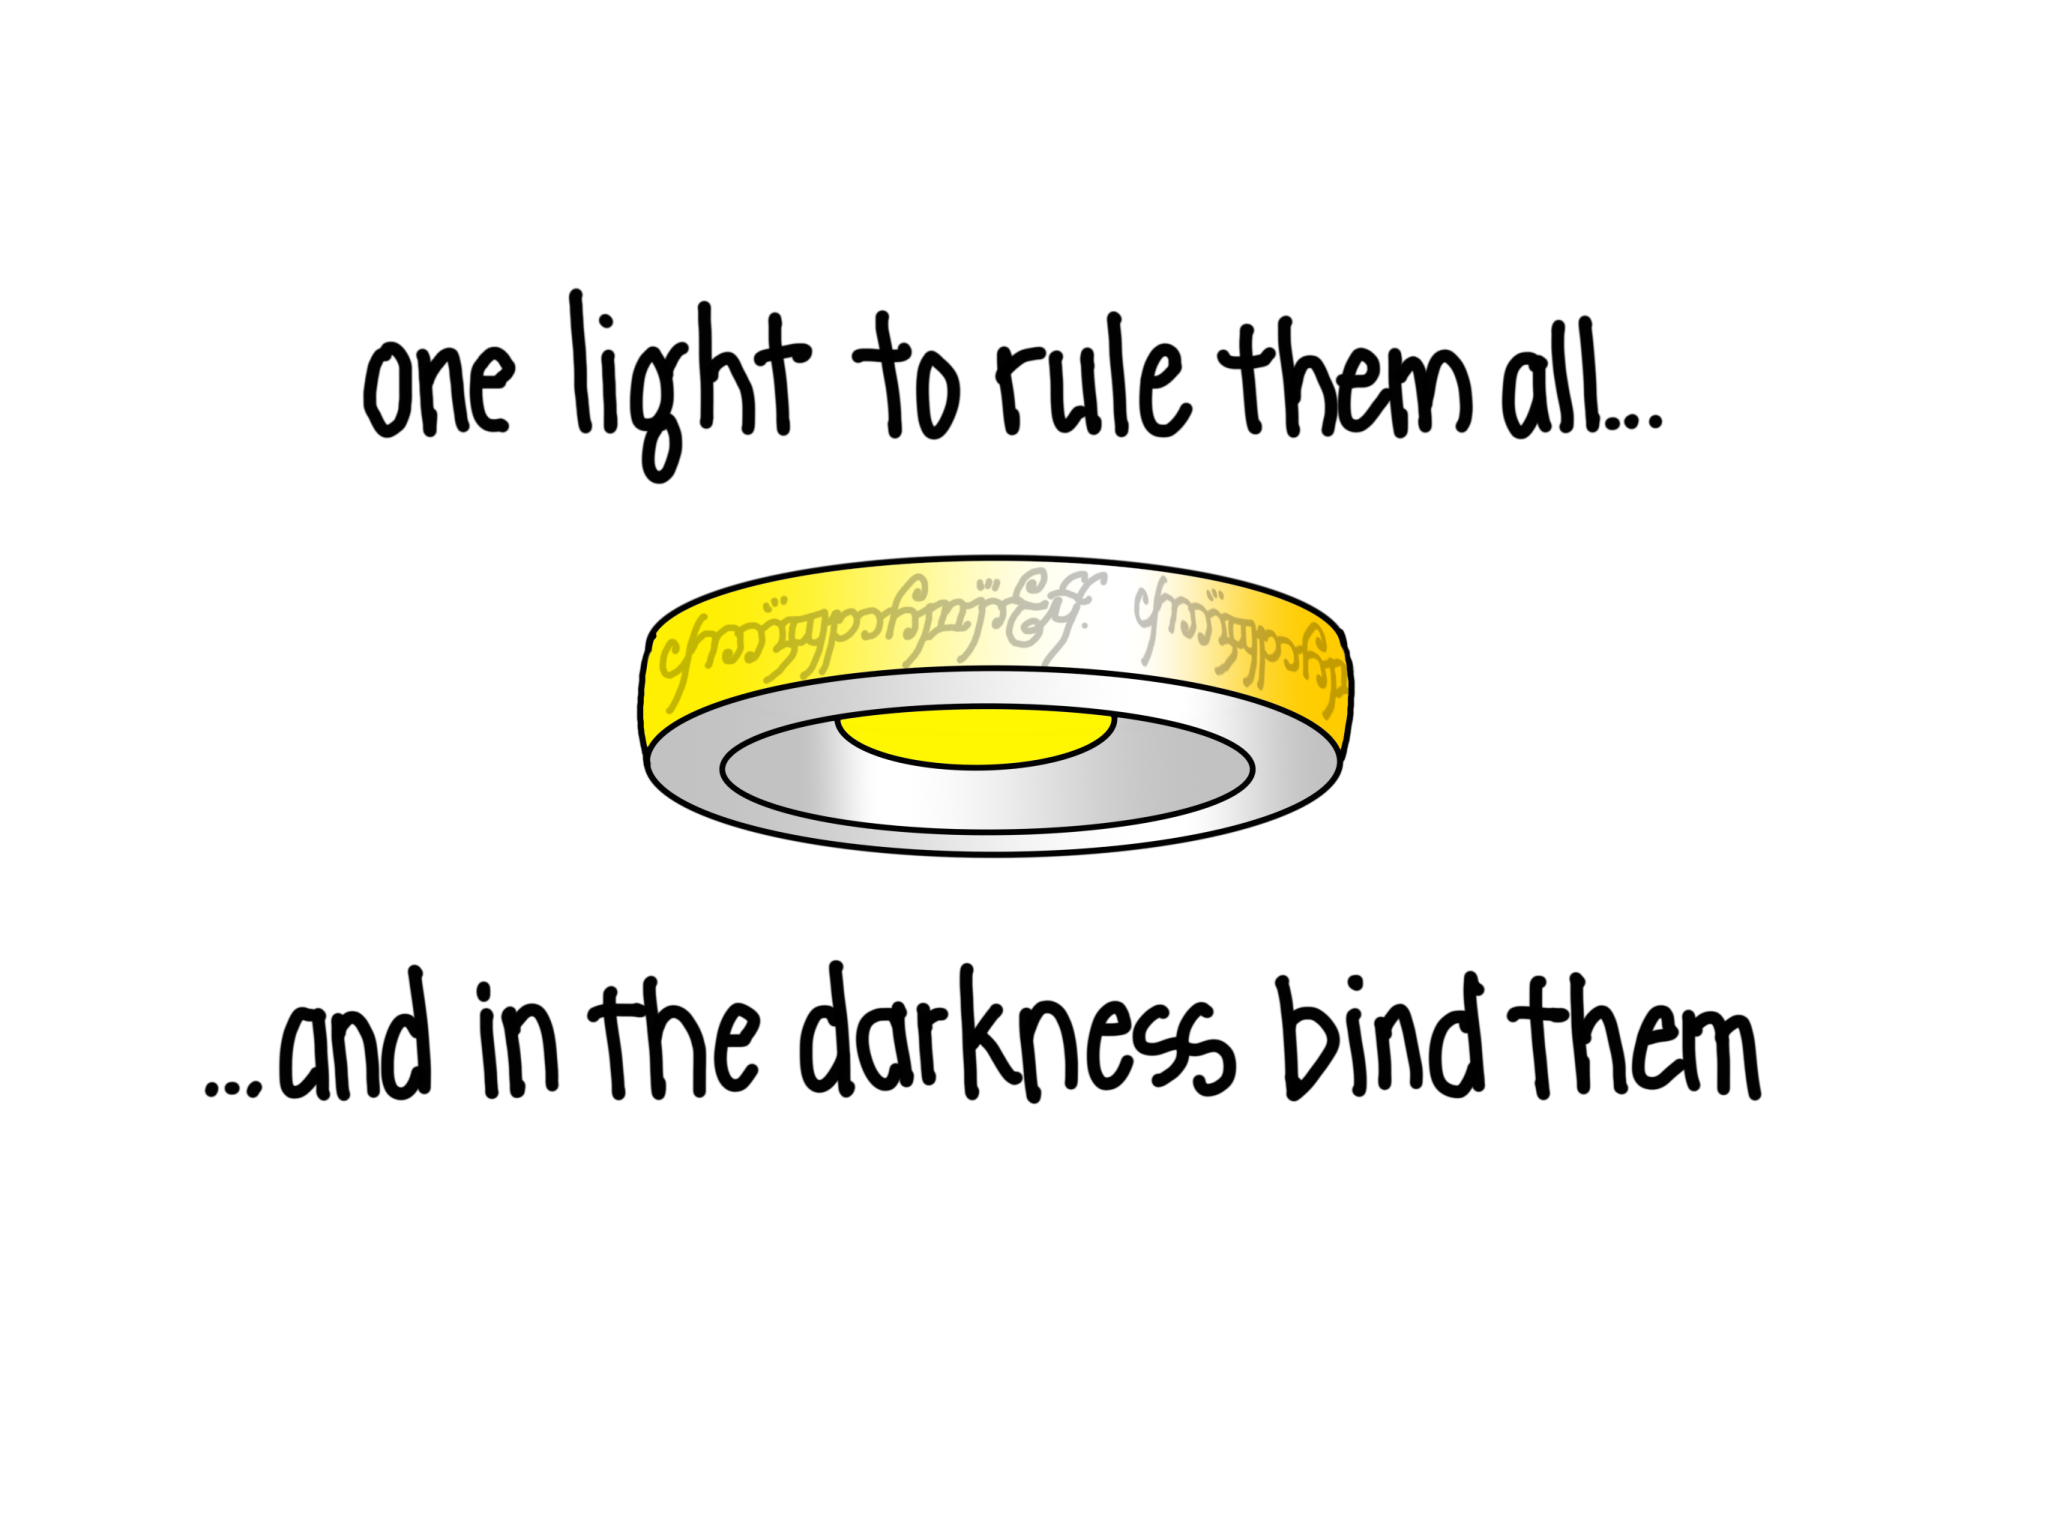 An illustration of a light with elvish from the Lord of the Rings around the edge. One light to rule them all......and in the darkness bind them